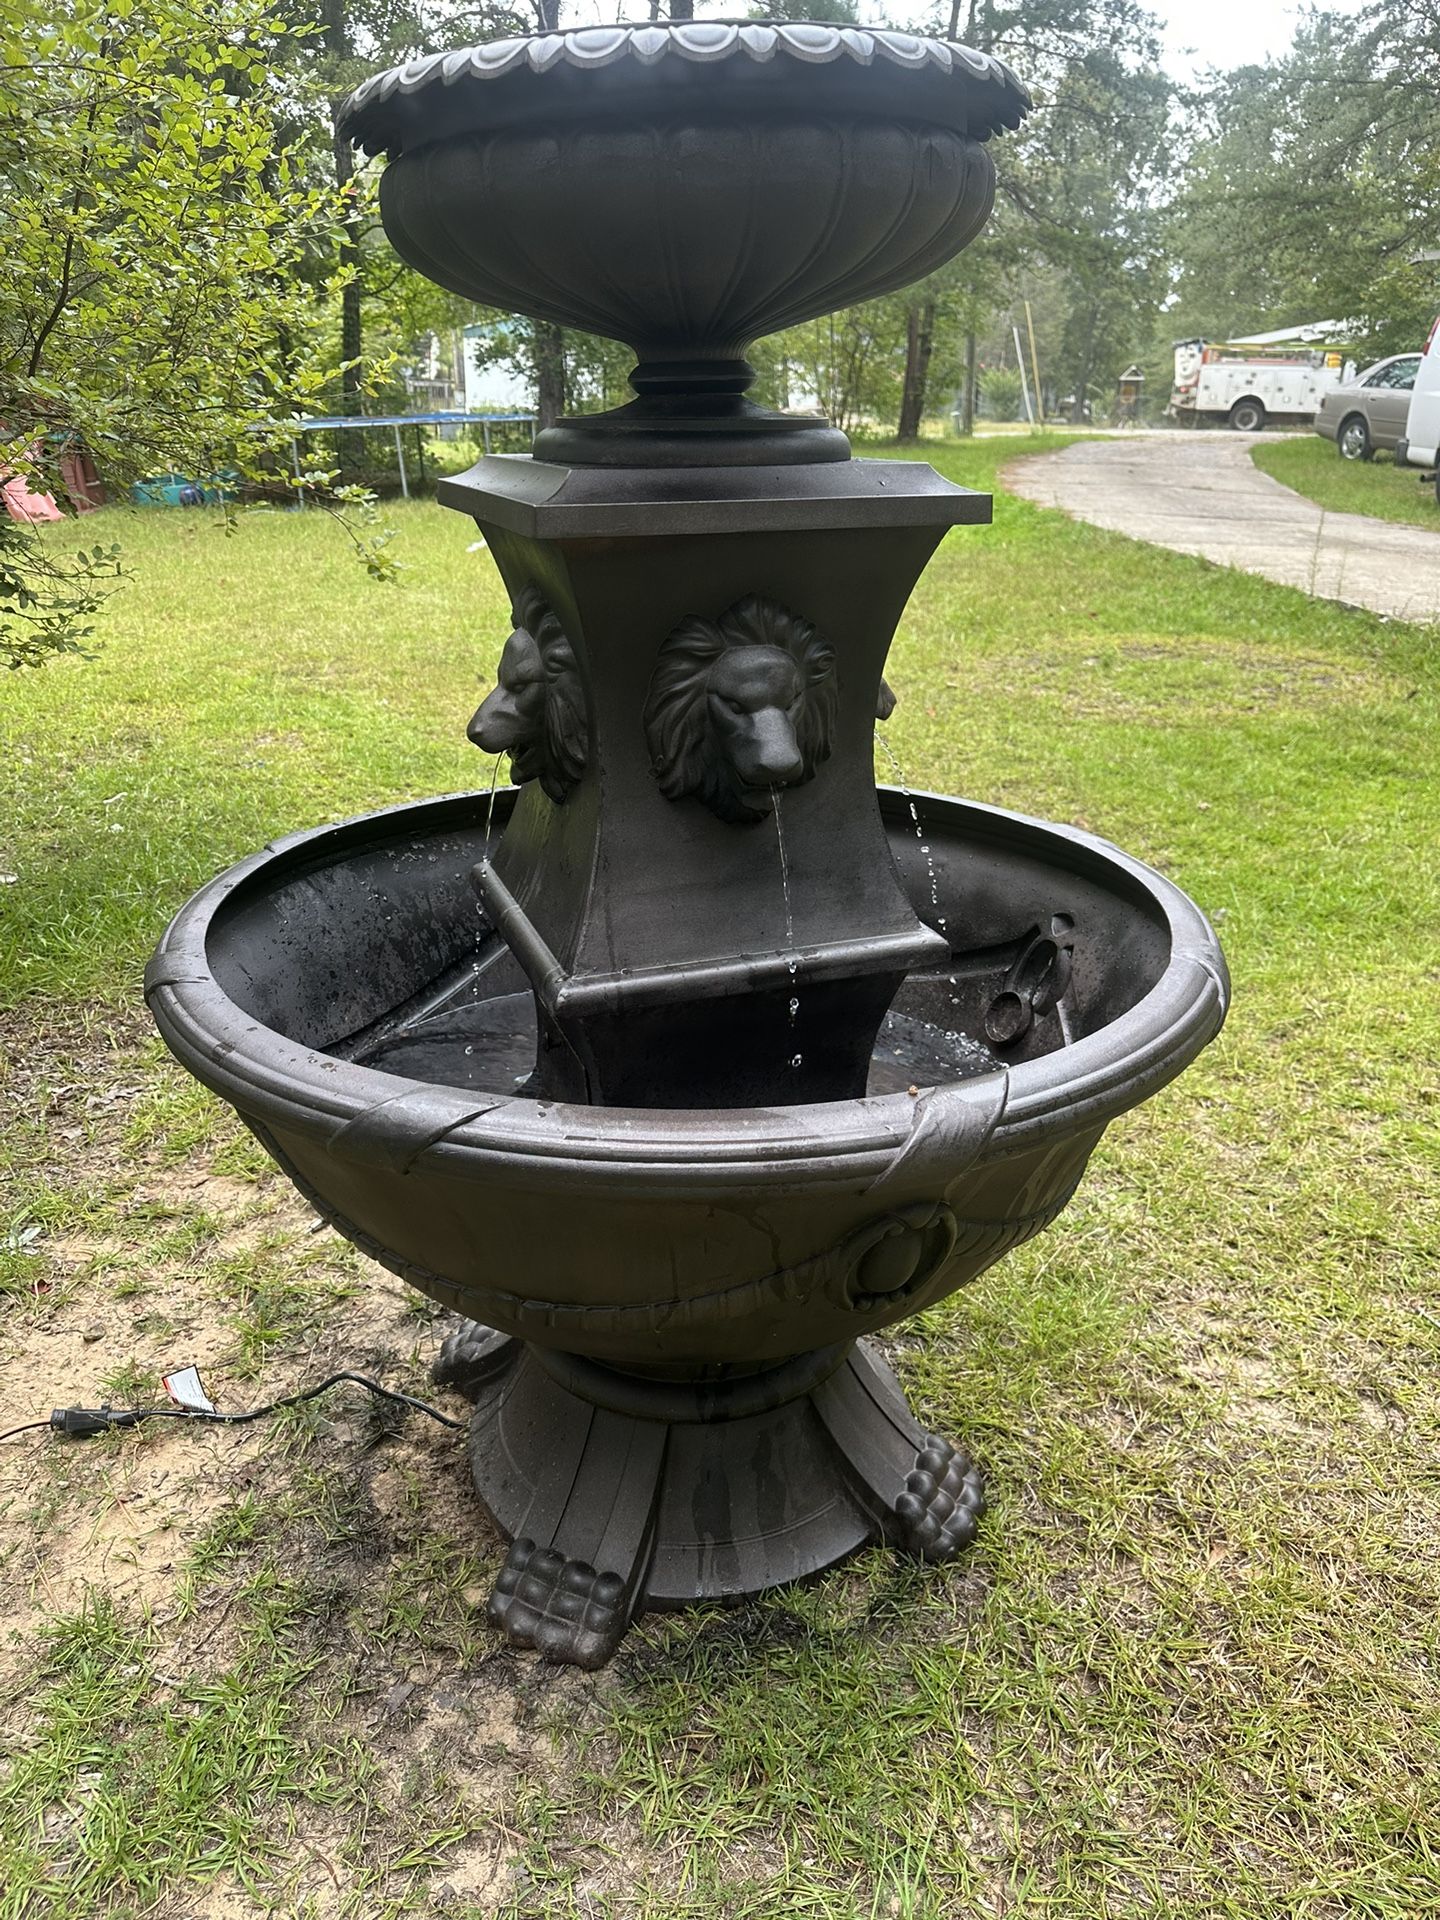 Metal Water Fountain. New Pump. Stands Nearly 5’. Best Offer Gets It.